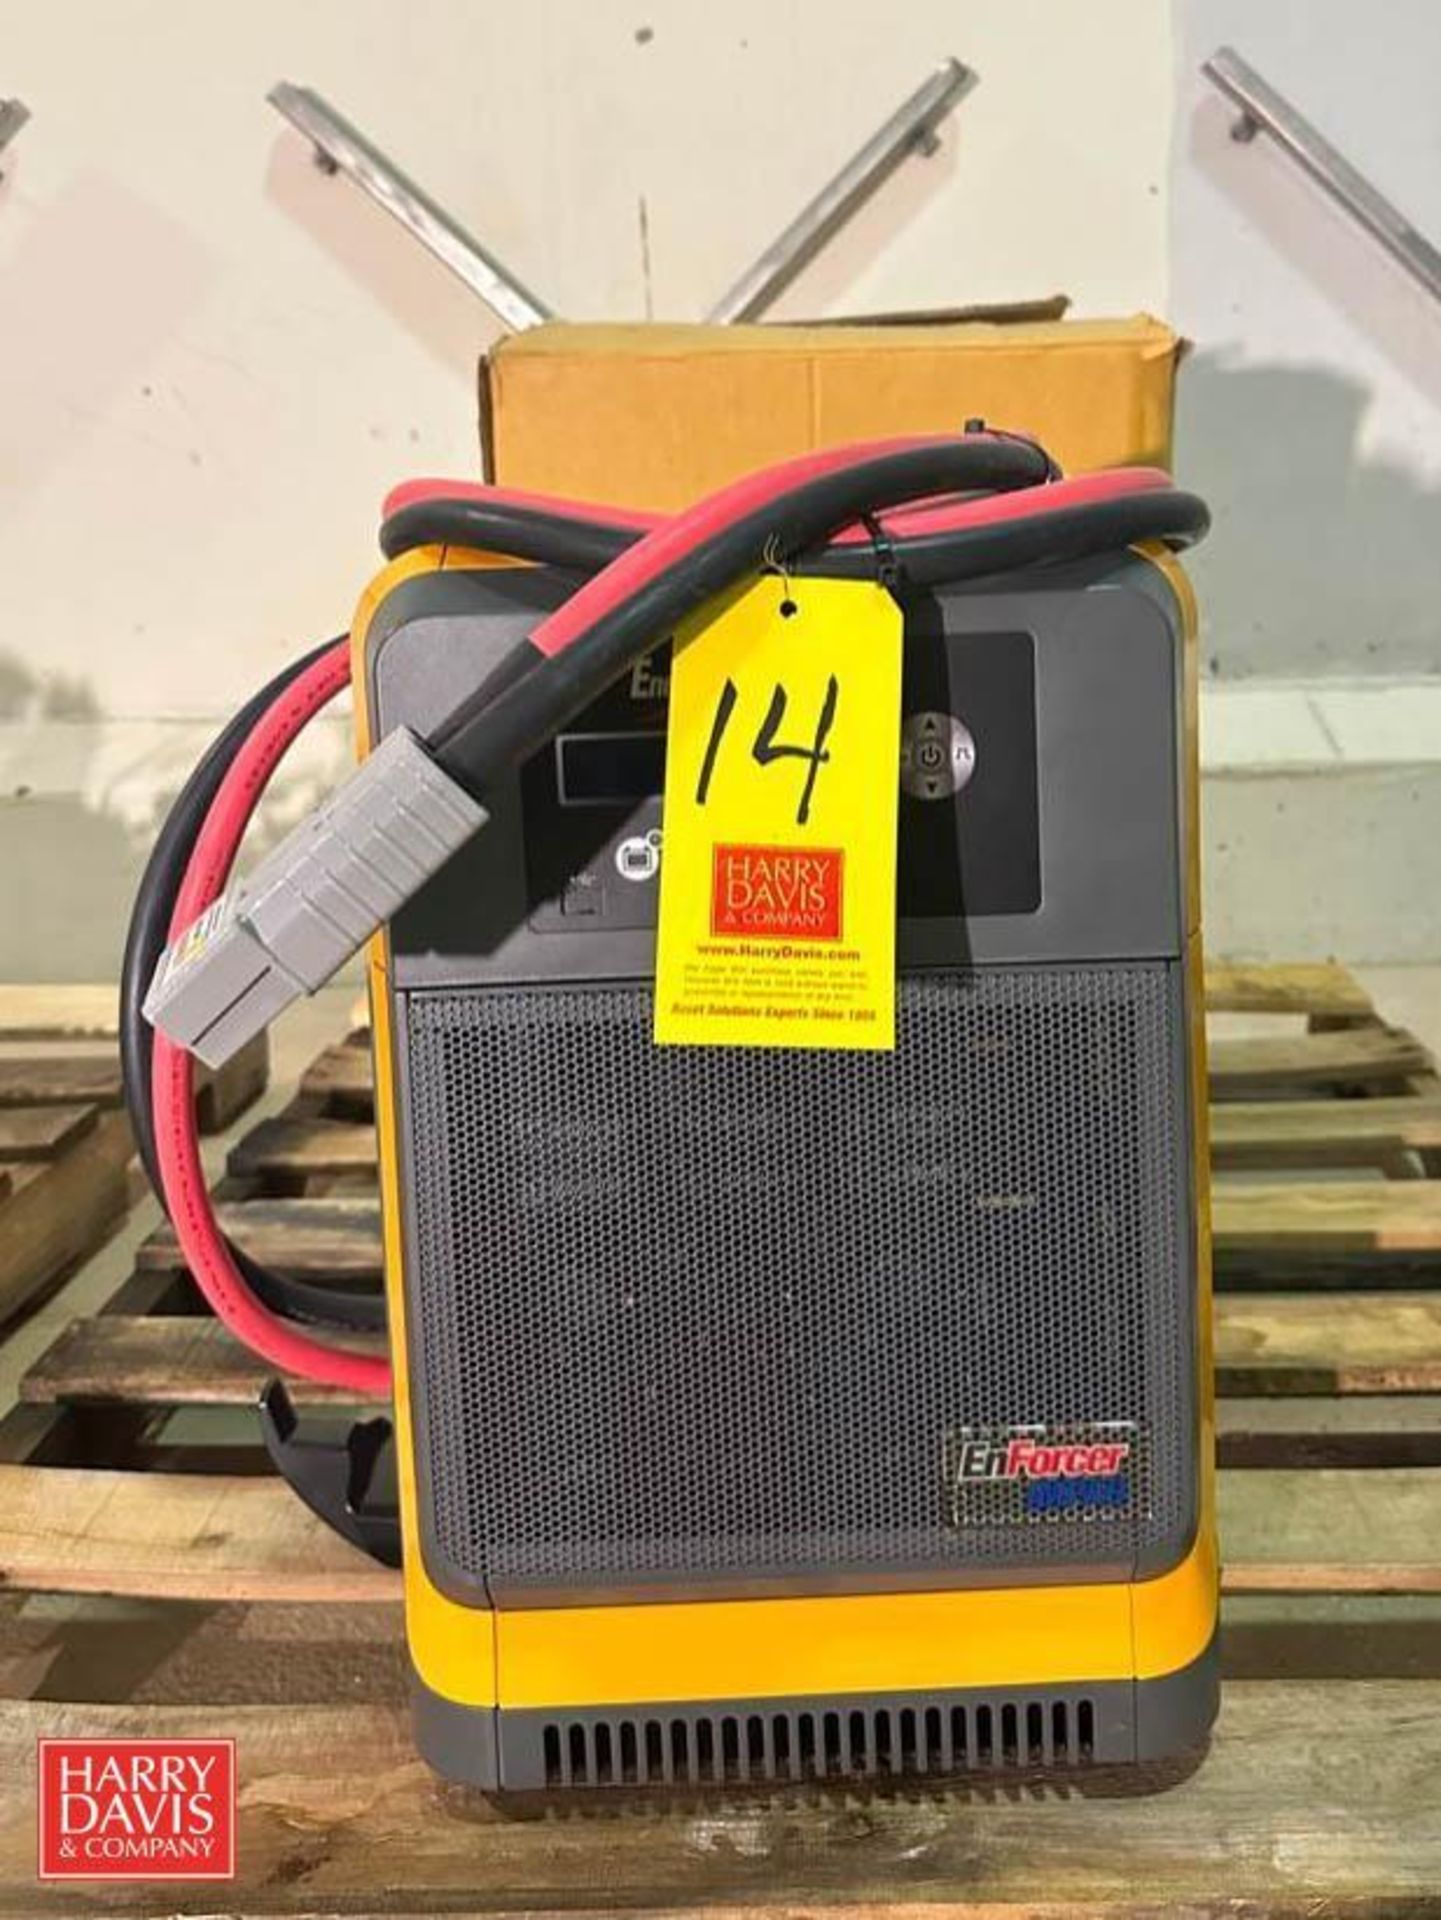 NEW EnerSys 24/36/48 Volt Battery Charger, Model: EI3-IN-4Y, S/N: SA553486